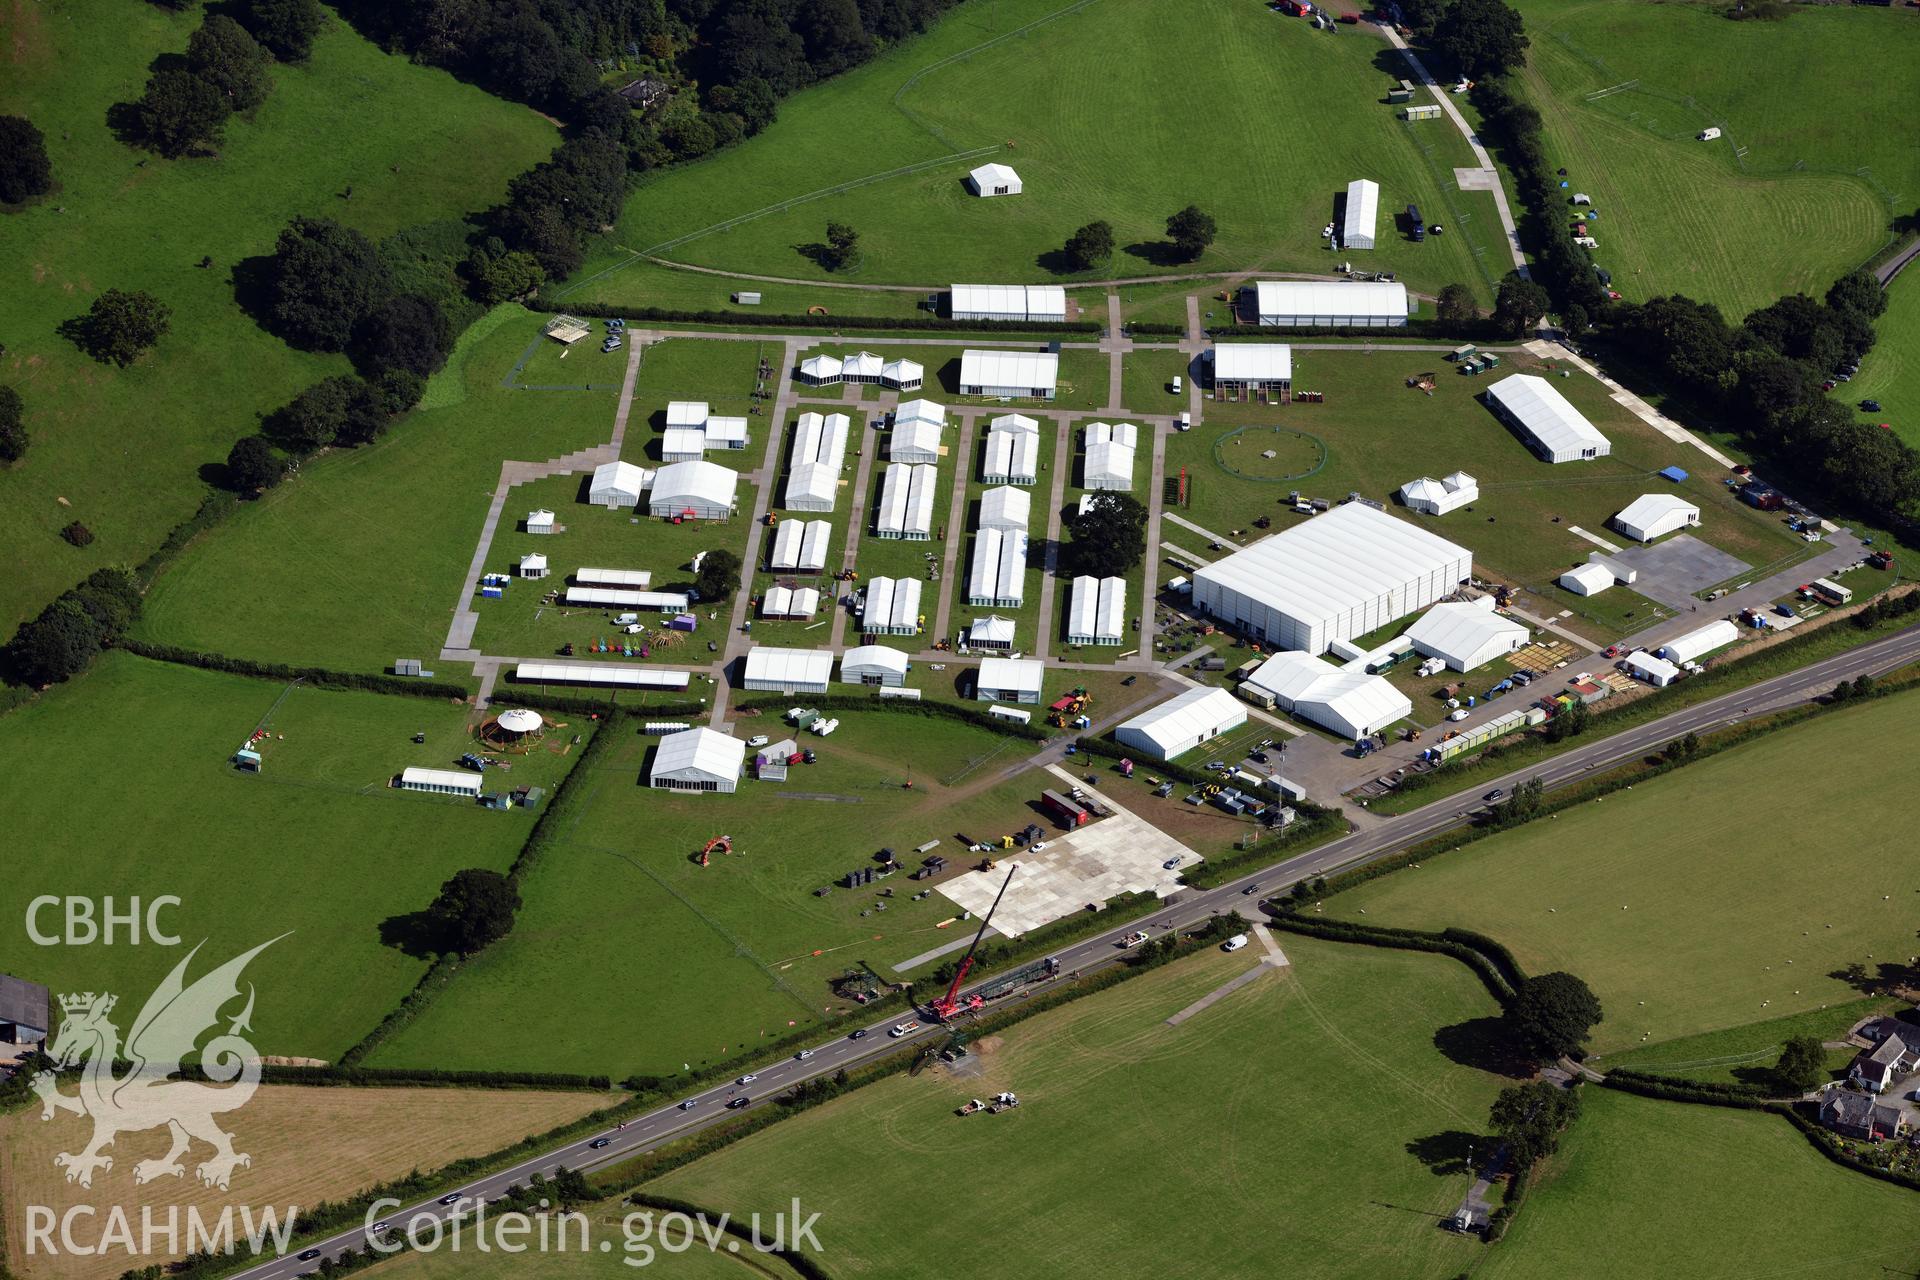 Maes yr Eisteddfod 2019, a mile to the south of Llanrwst town. Photographed during the process of setting up. Oblique aerial photograph taken during the Royal Commission?s programme of archaeological aerial reconnaissance by Toby Driver on 23rd July 2019.